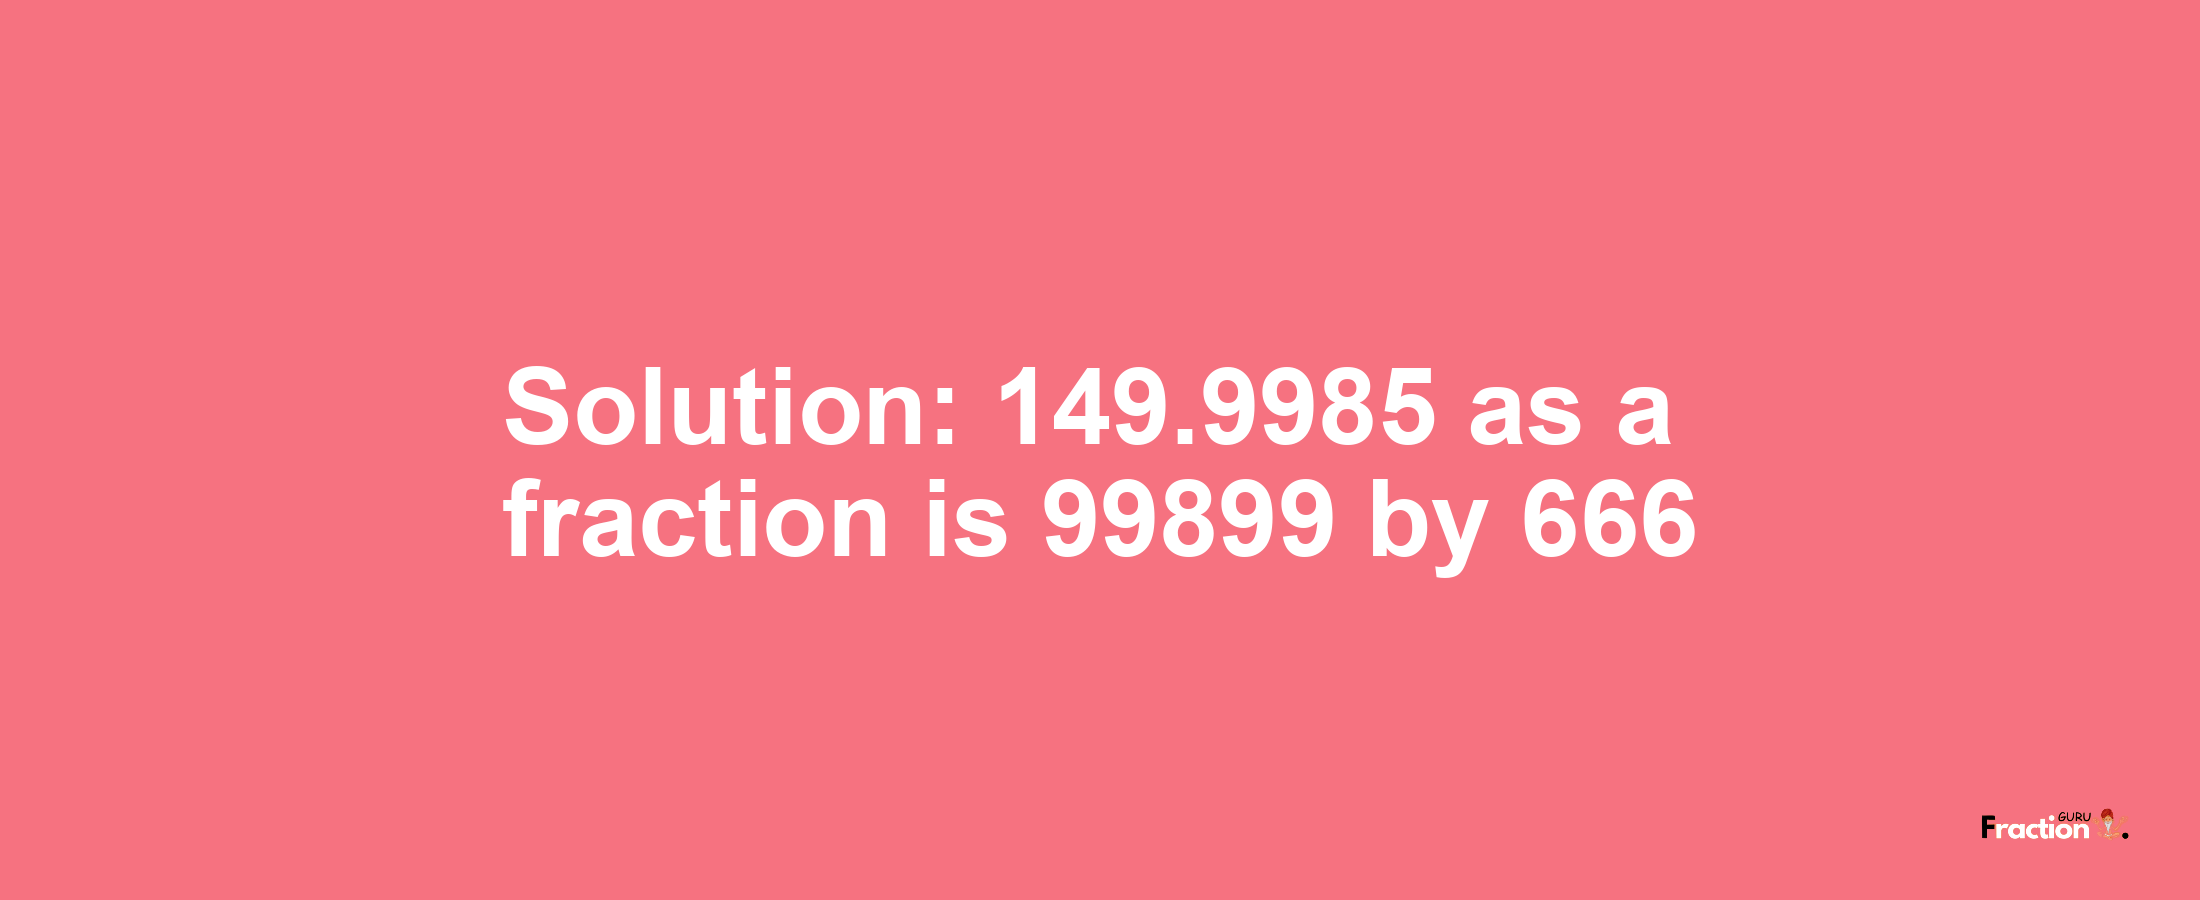 Solution:149.9985 as a fraction is 99899/666